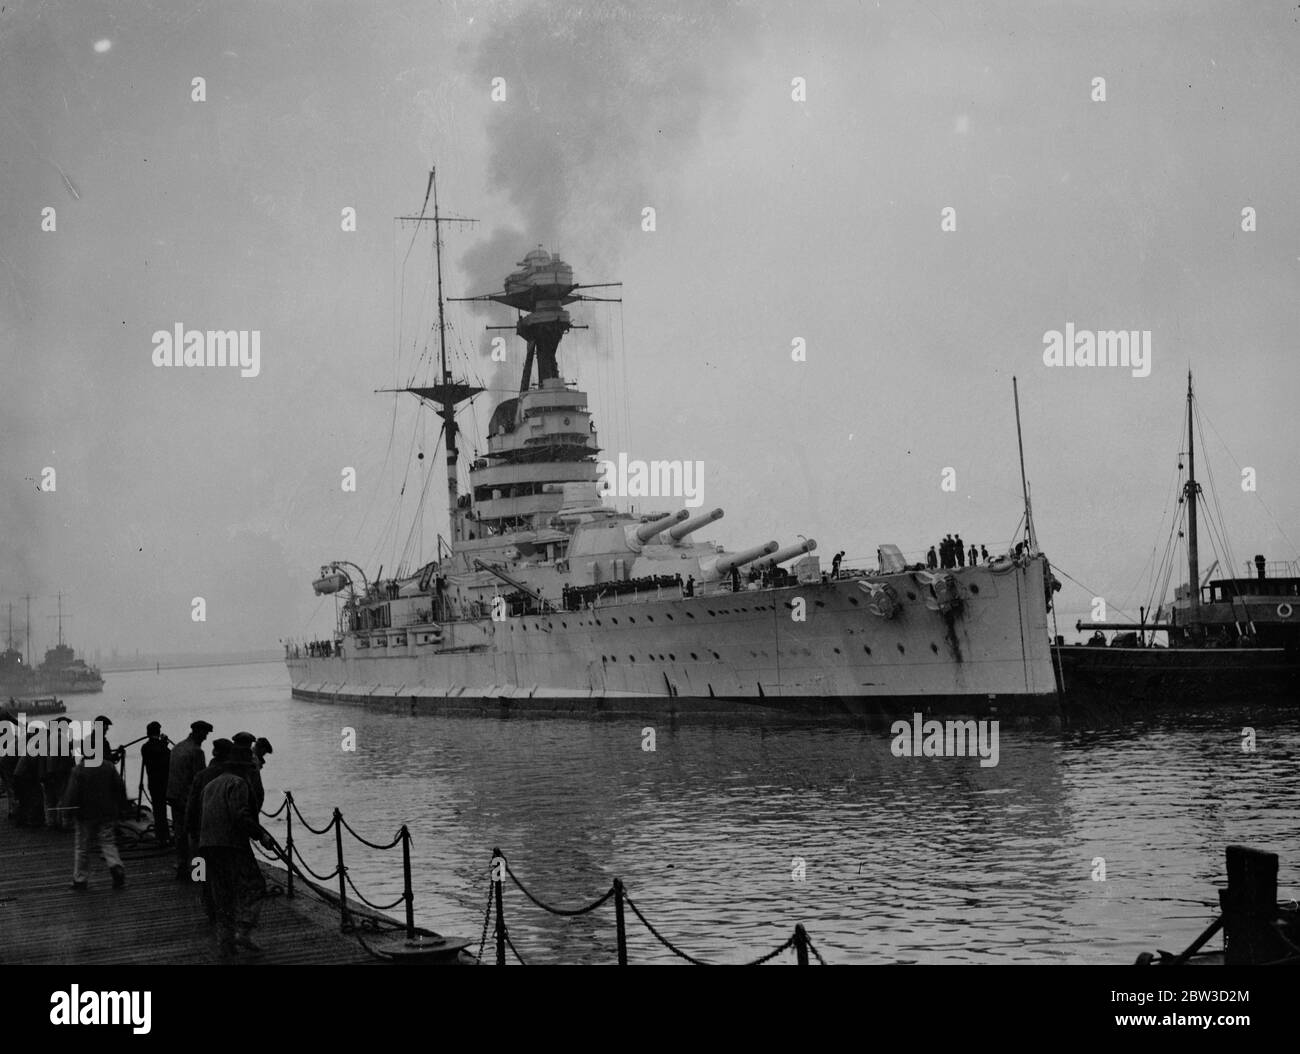 Battleship home from the mediterranean . Sailors will spend christmas in England . The 29 , 150 ton battleship HMS Resolution (pennant number 09 ) arrived at Porstmouth from Alexandria after having completed more than two years service on the Mediterranean station . Many sailors from other warships were aboard her as well as her own crew so that they could spend christmas at home . The HMS Resolution bes been relieved by HMS Ramillies ( 07 ) which is of similar class and tonnage . Photo shows , HMS Resolution arriving at Portsmouth . 5 November 1935 Stock Photo